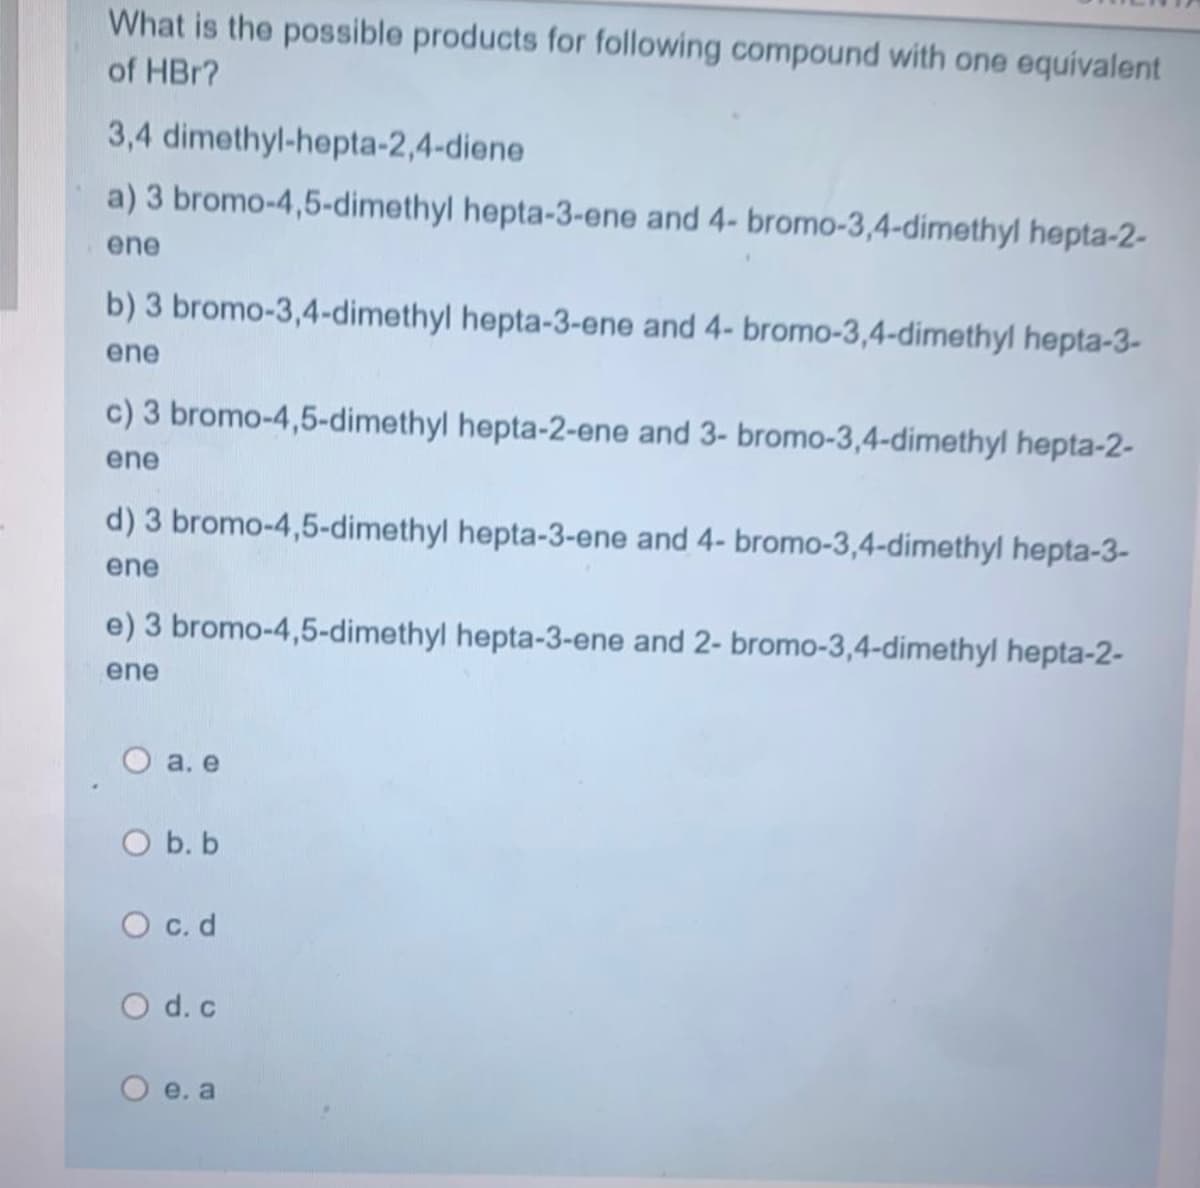 What is the possible products for following compound with one equivalent
of HBr?
3,4 dimethyl-hepta-2,4-diene
a) 3 bromo-4,5-dimethyl hepta-3-ene and 4- bromo-3,4-dimethyl hepta-2-
ene
b) 3 bromo-3,4-dimethyl hepta-3-ene and 4- bromo-3,4-dimethyl hepta-3-
ene
c) 3 bromo-4,5-dimethyl hepta-2-ene and 3- bromo-3,4-dimethyl hepta-2-
ene
d) 3 bromo-4,5-dimethyl hepta-3-ene and 4- bromo-3,4-dimethyl hepta-3-
ene
e) 3 bromo-4,5-dimethyl hepta-3-ene and 2- bromo-3,4-dimethyl hepta-2-
ene
O a. e
O b. b
O c.d
O d. c
O e. a
